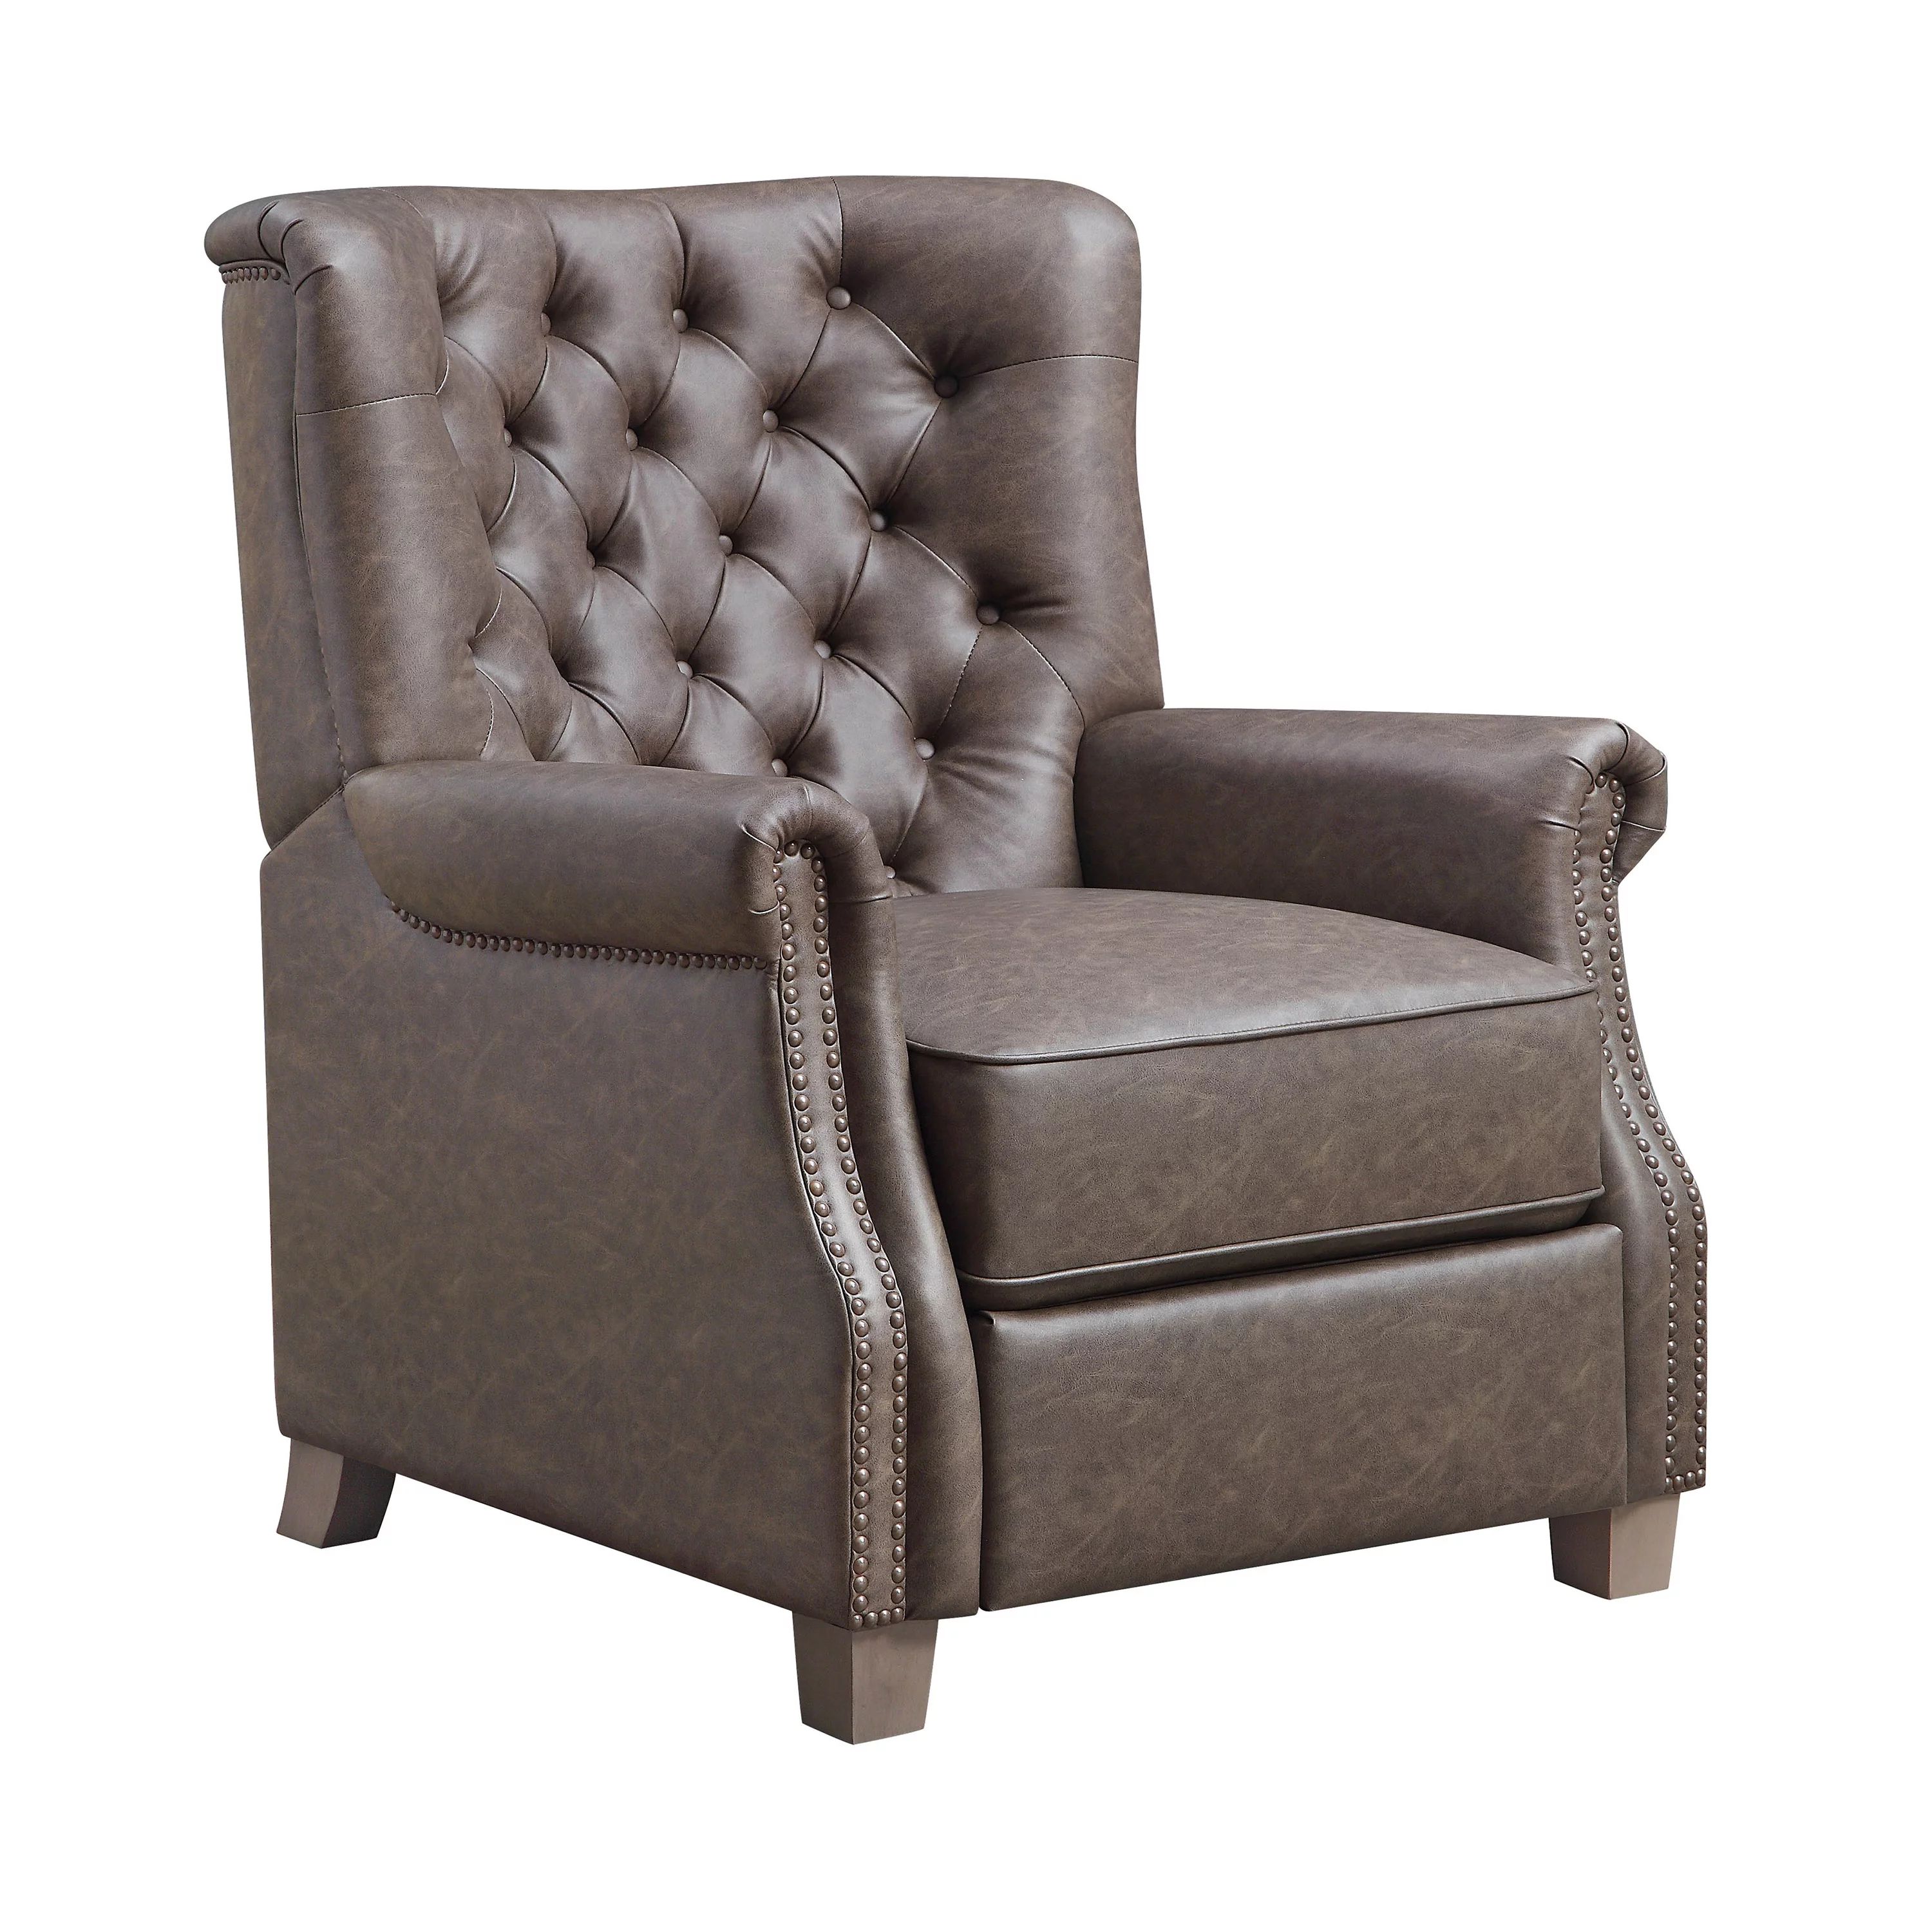 Better Homes & Garden Tufted Push Back Recliner, Brown Faux Leather Upholstery | Walmart (US)